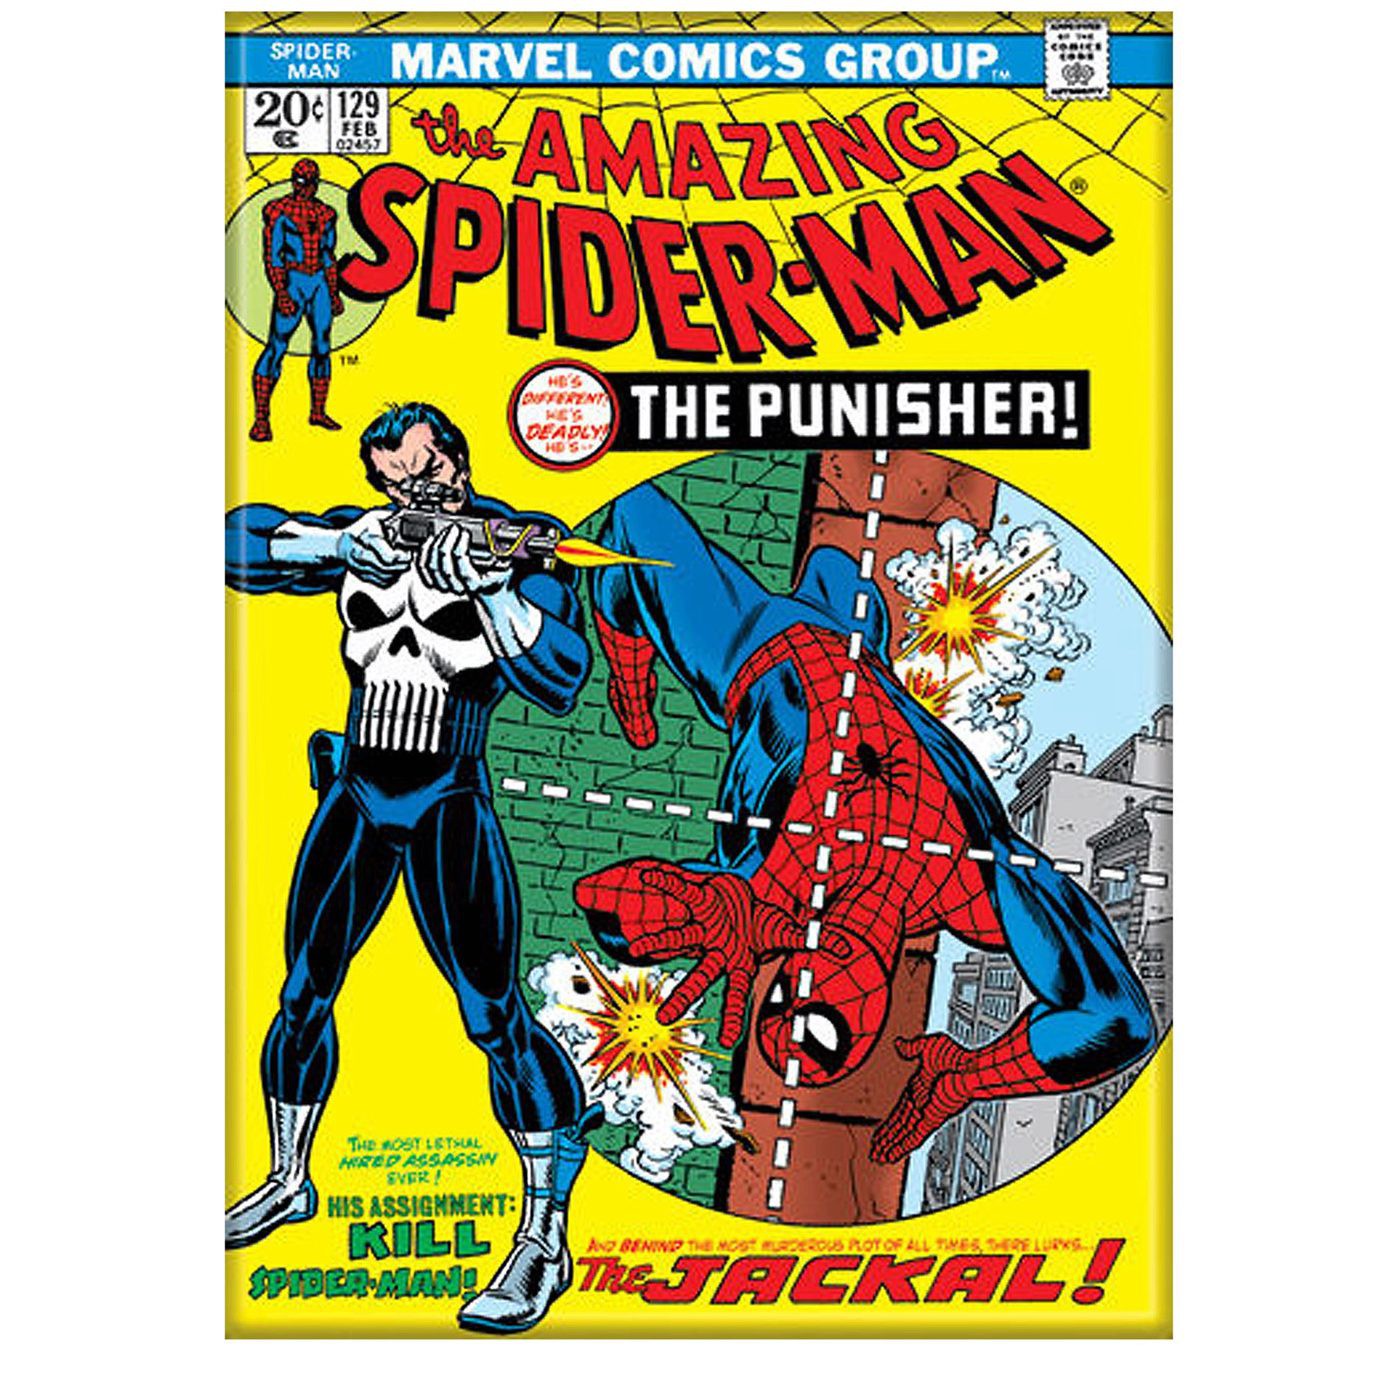 Amazing Spider-Man #129 Cover Magnet